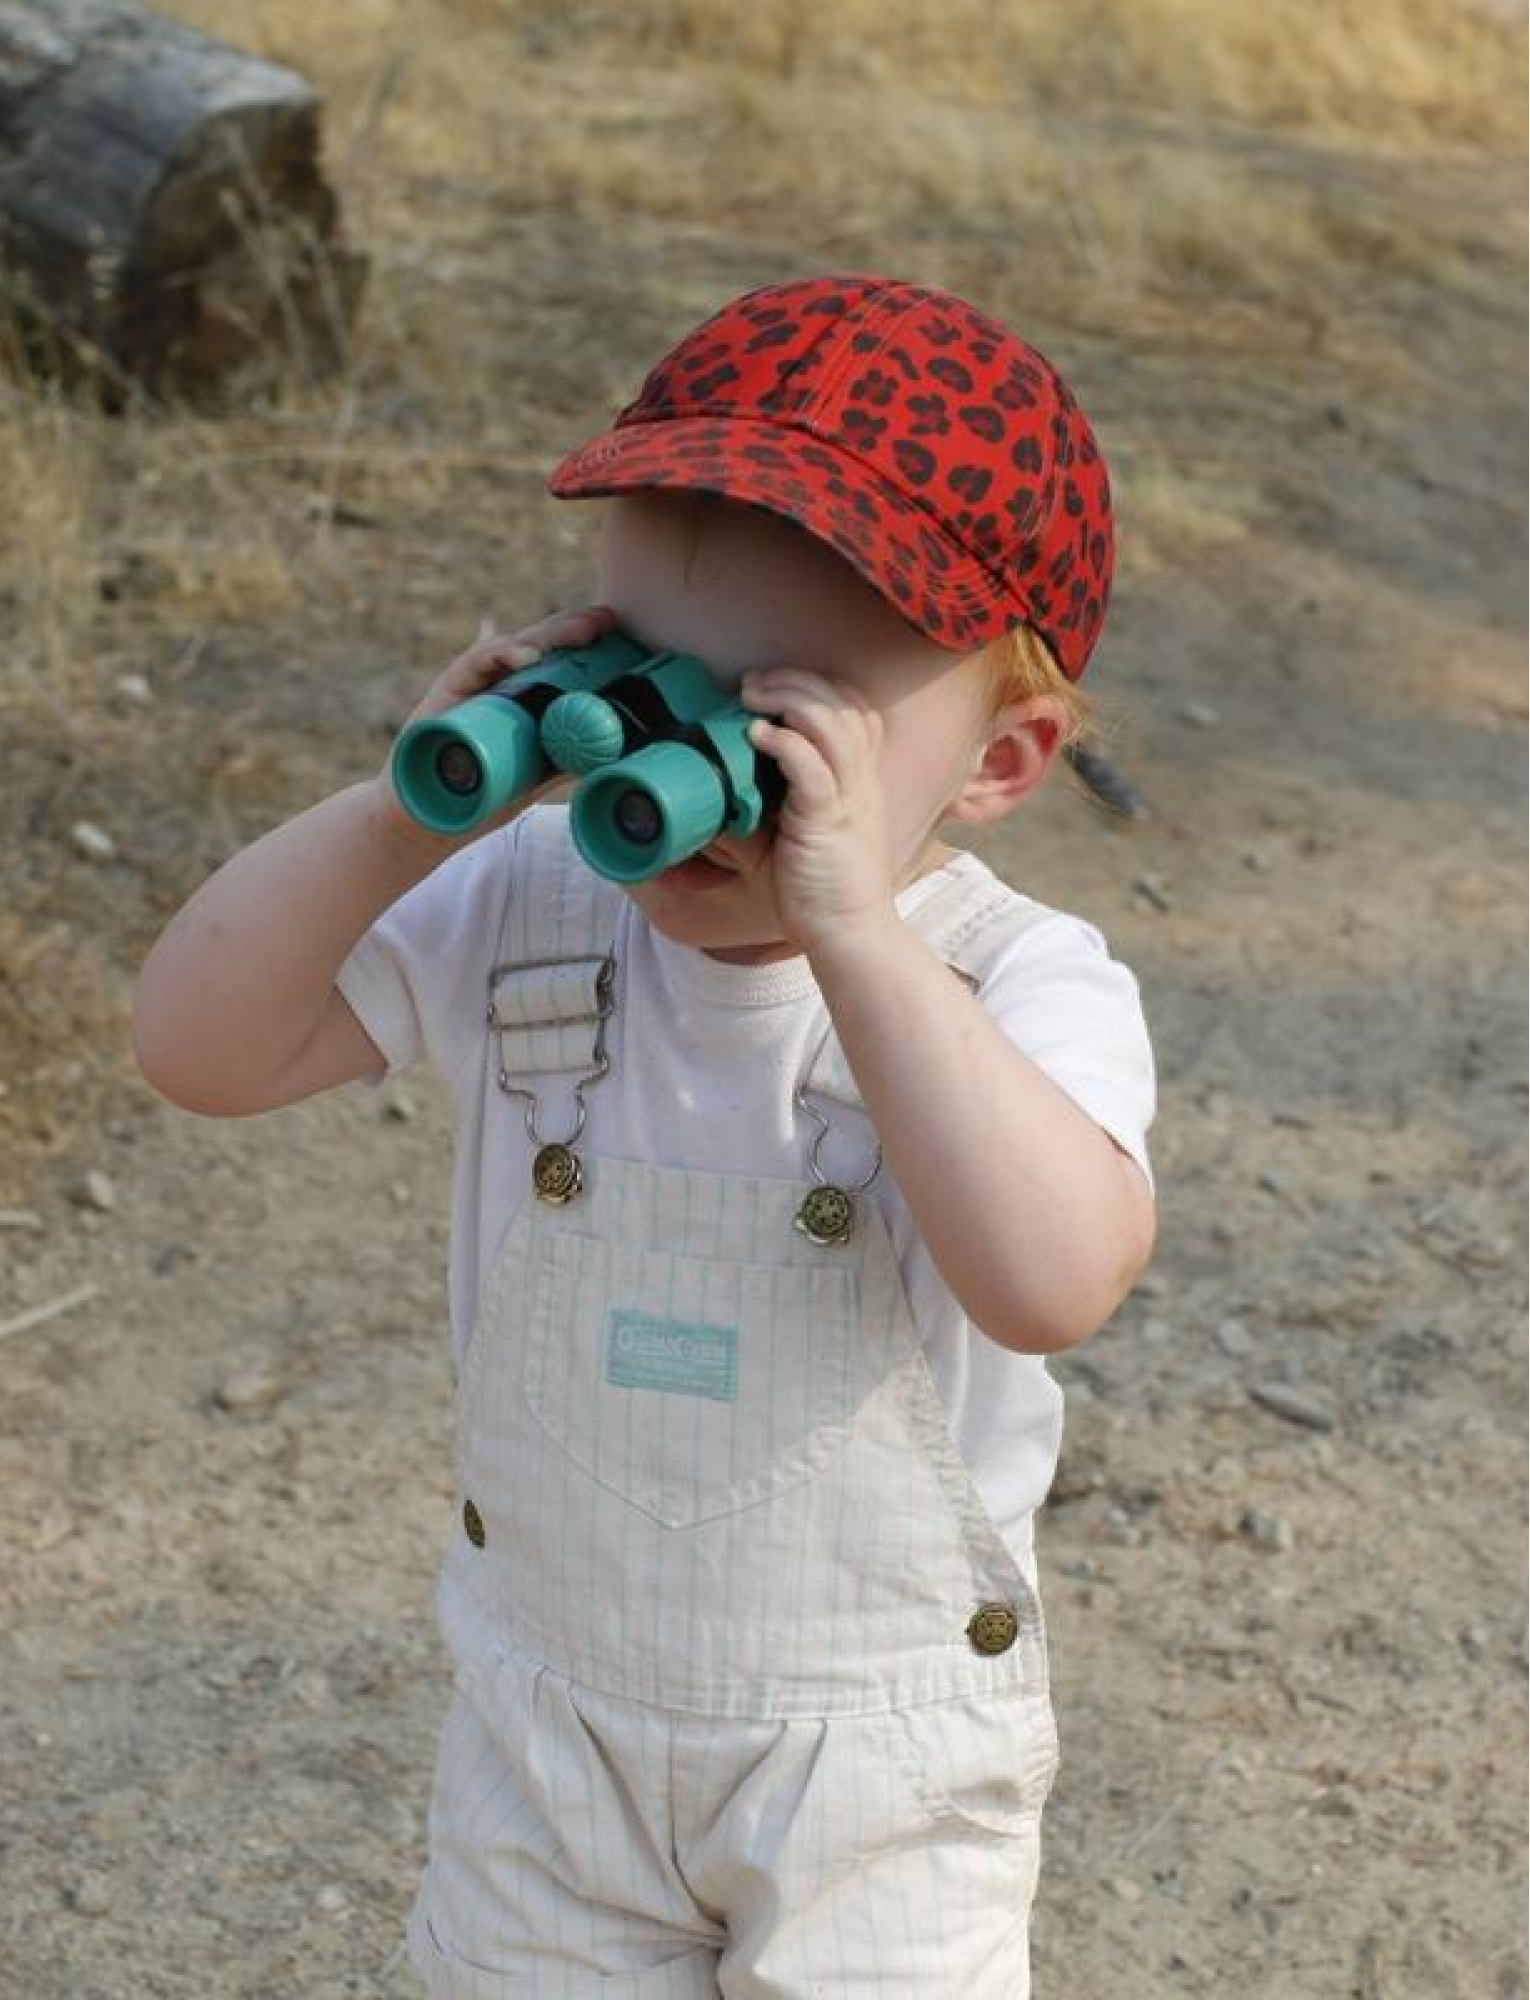 A young child wearing overalls looks through binoculars.